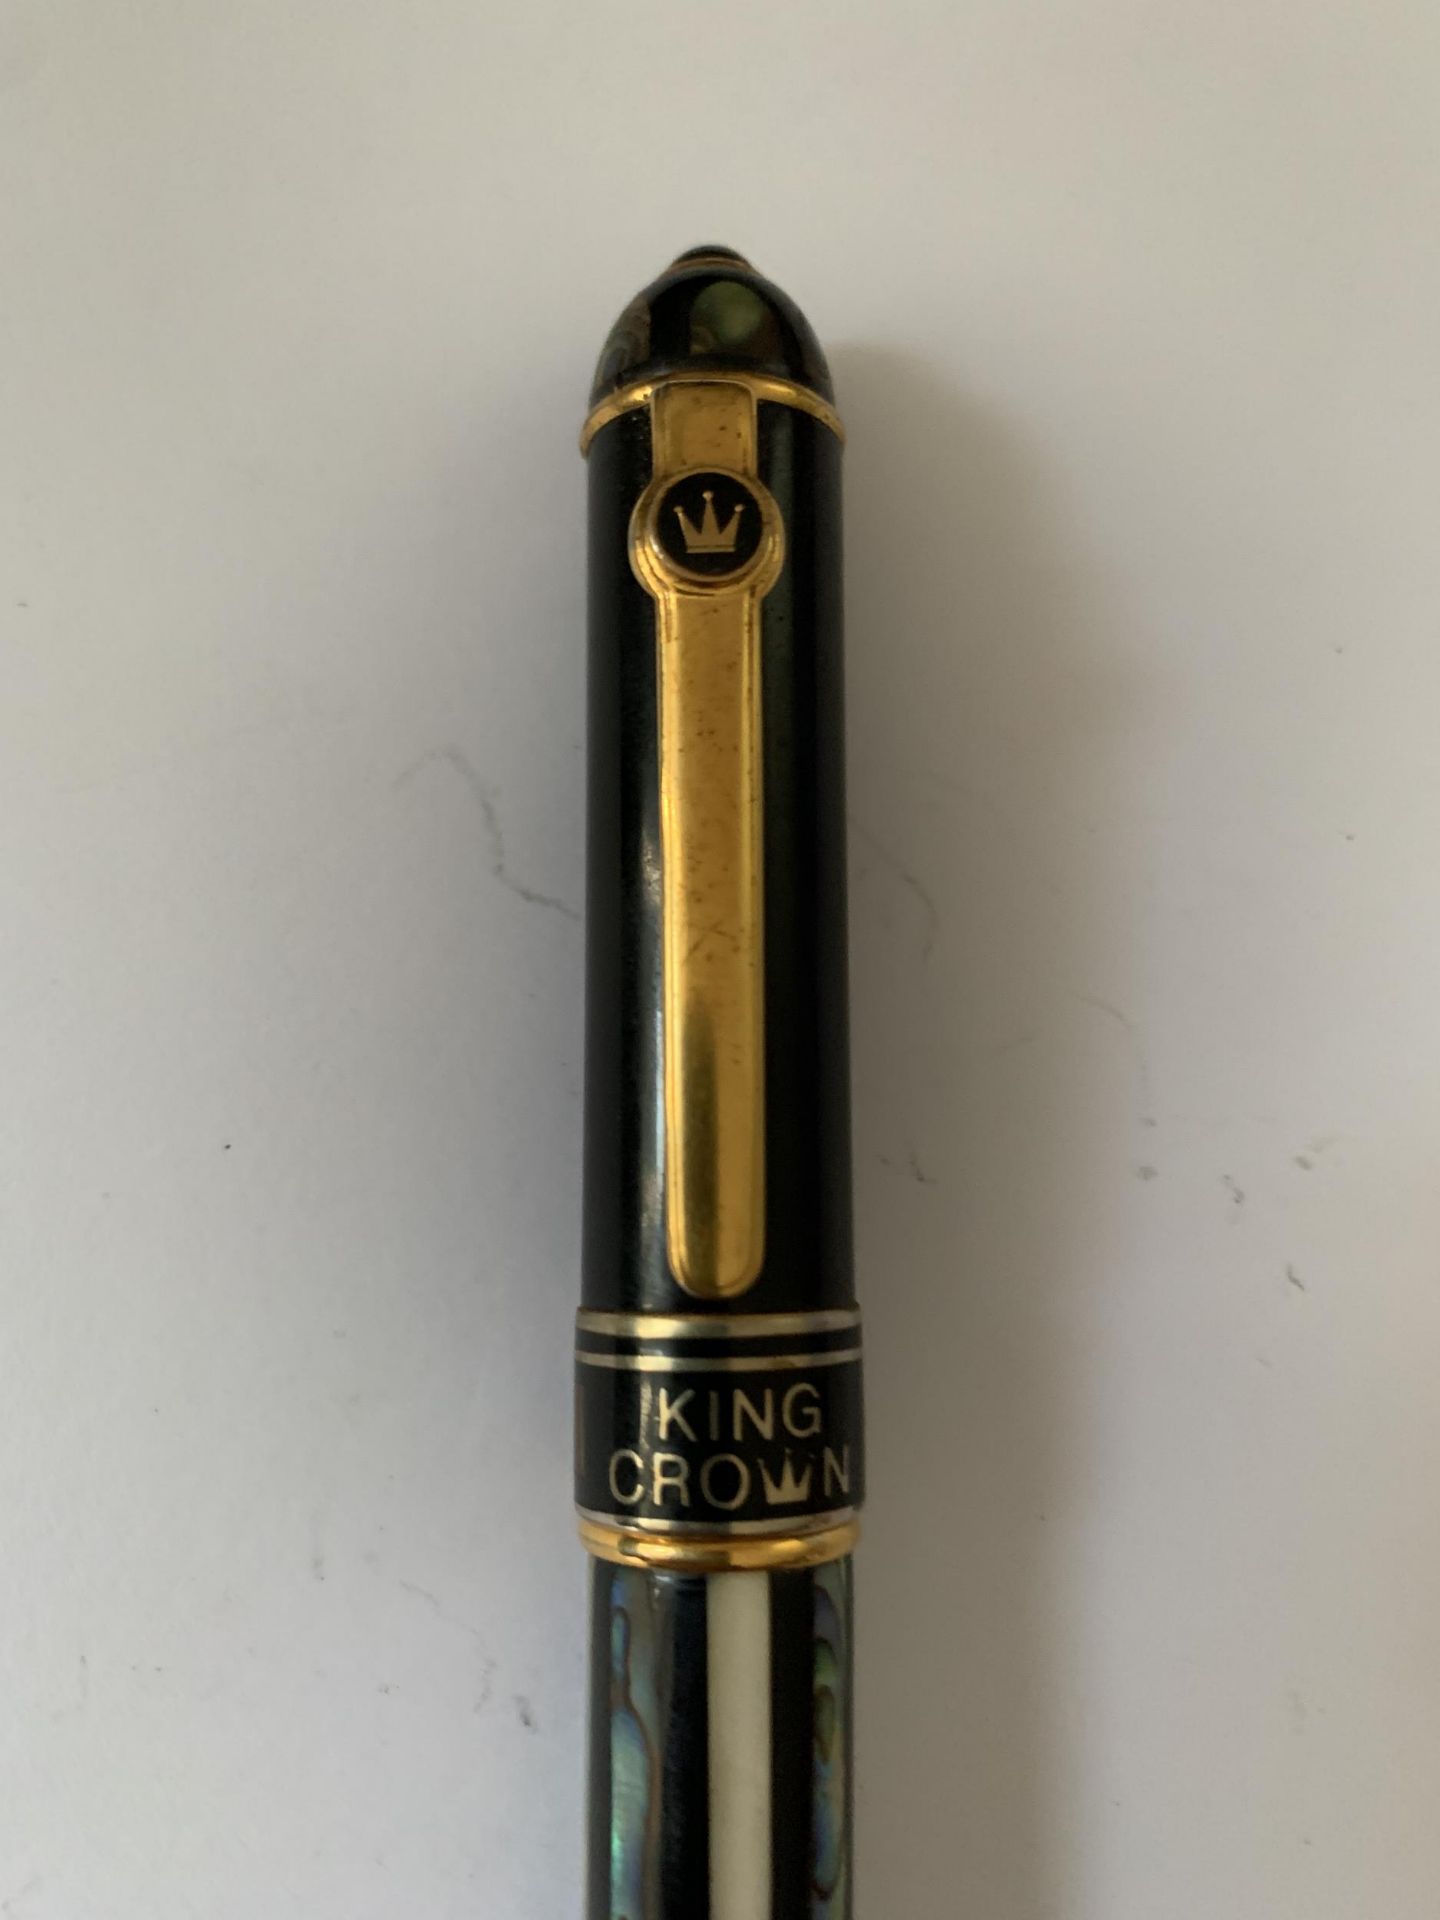 A KING CROWN 0125 FOUNTAIN PEN INLAID WITH SHELL WITH AN 18 CARAT GOLD NIB - Image 2 of 5